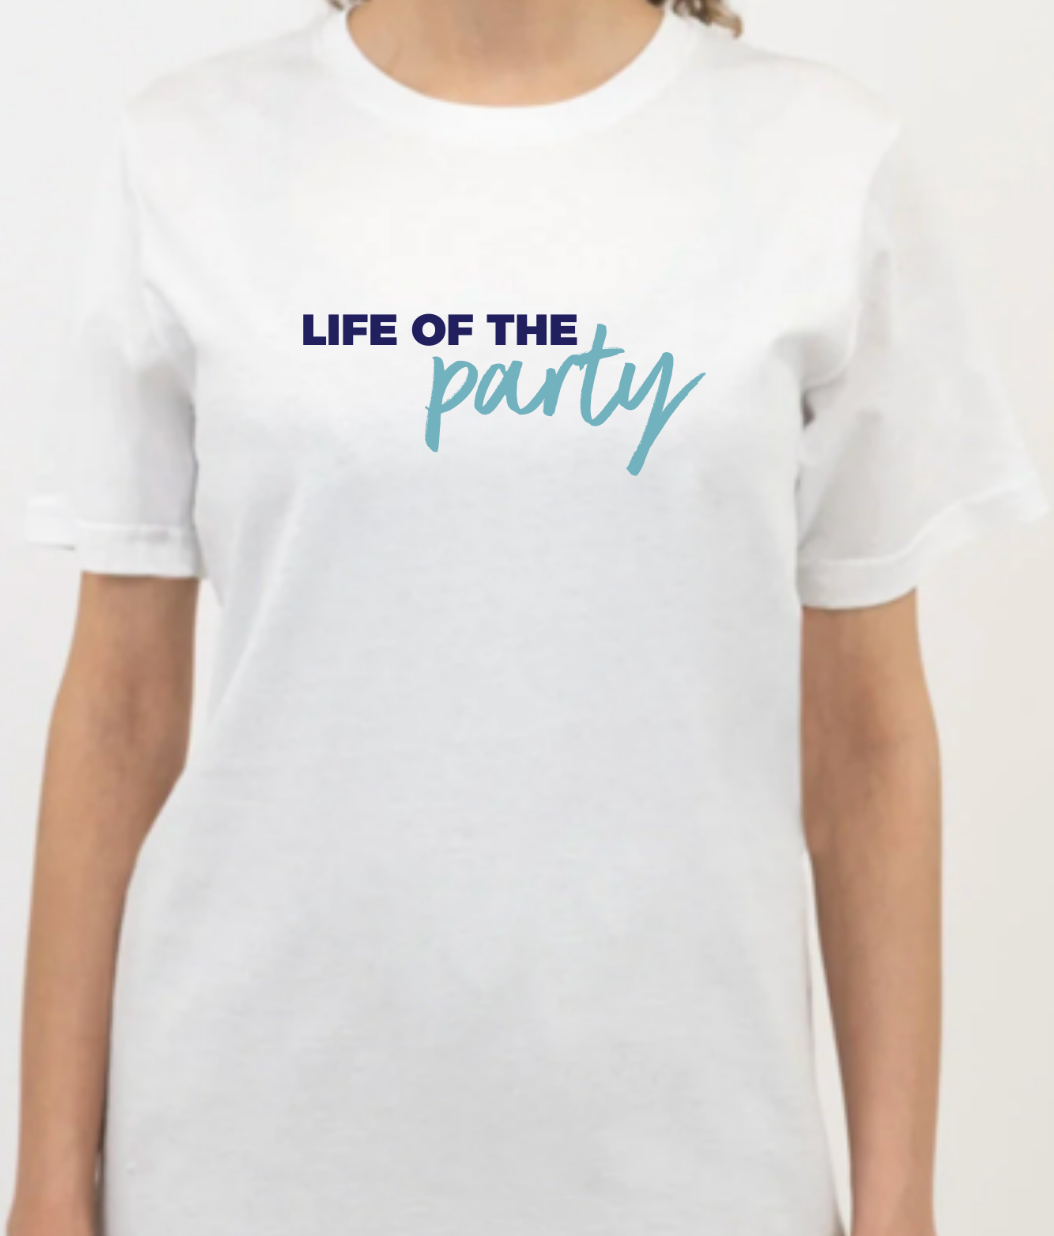 LIFE OF THE PARTY women's white t-shirt